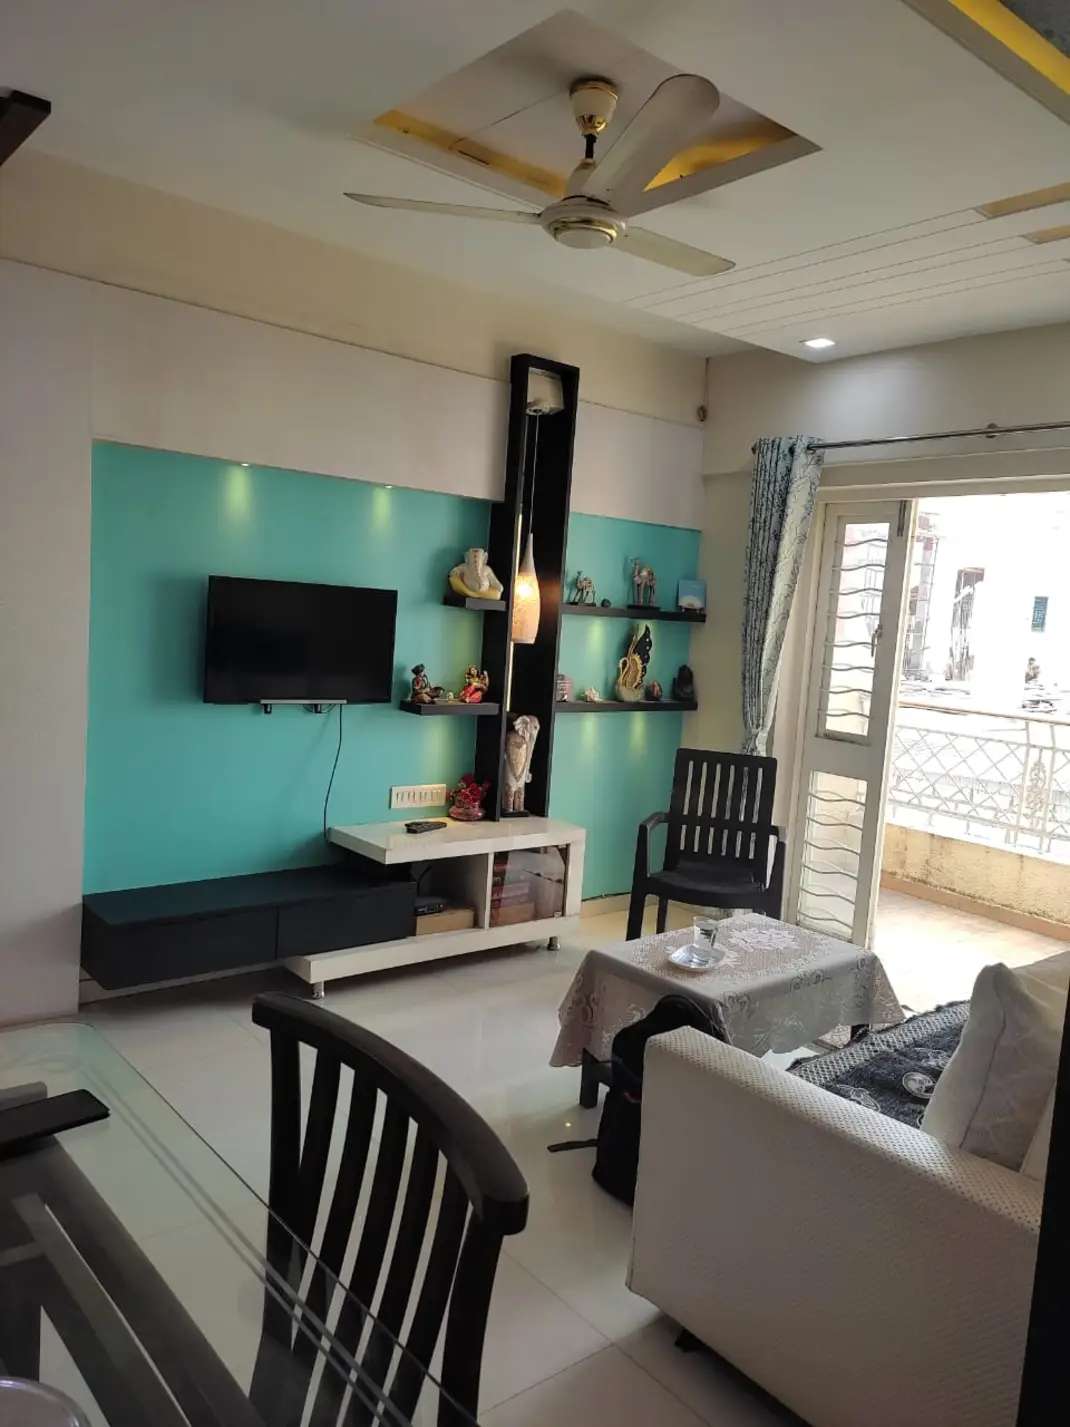 2 Bed/ 2 Bath Rent Apartment/ Flat, Furnished for rent @Rose icon society, Kunal road ,pimple saudagar pune